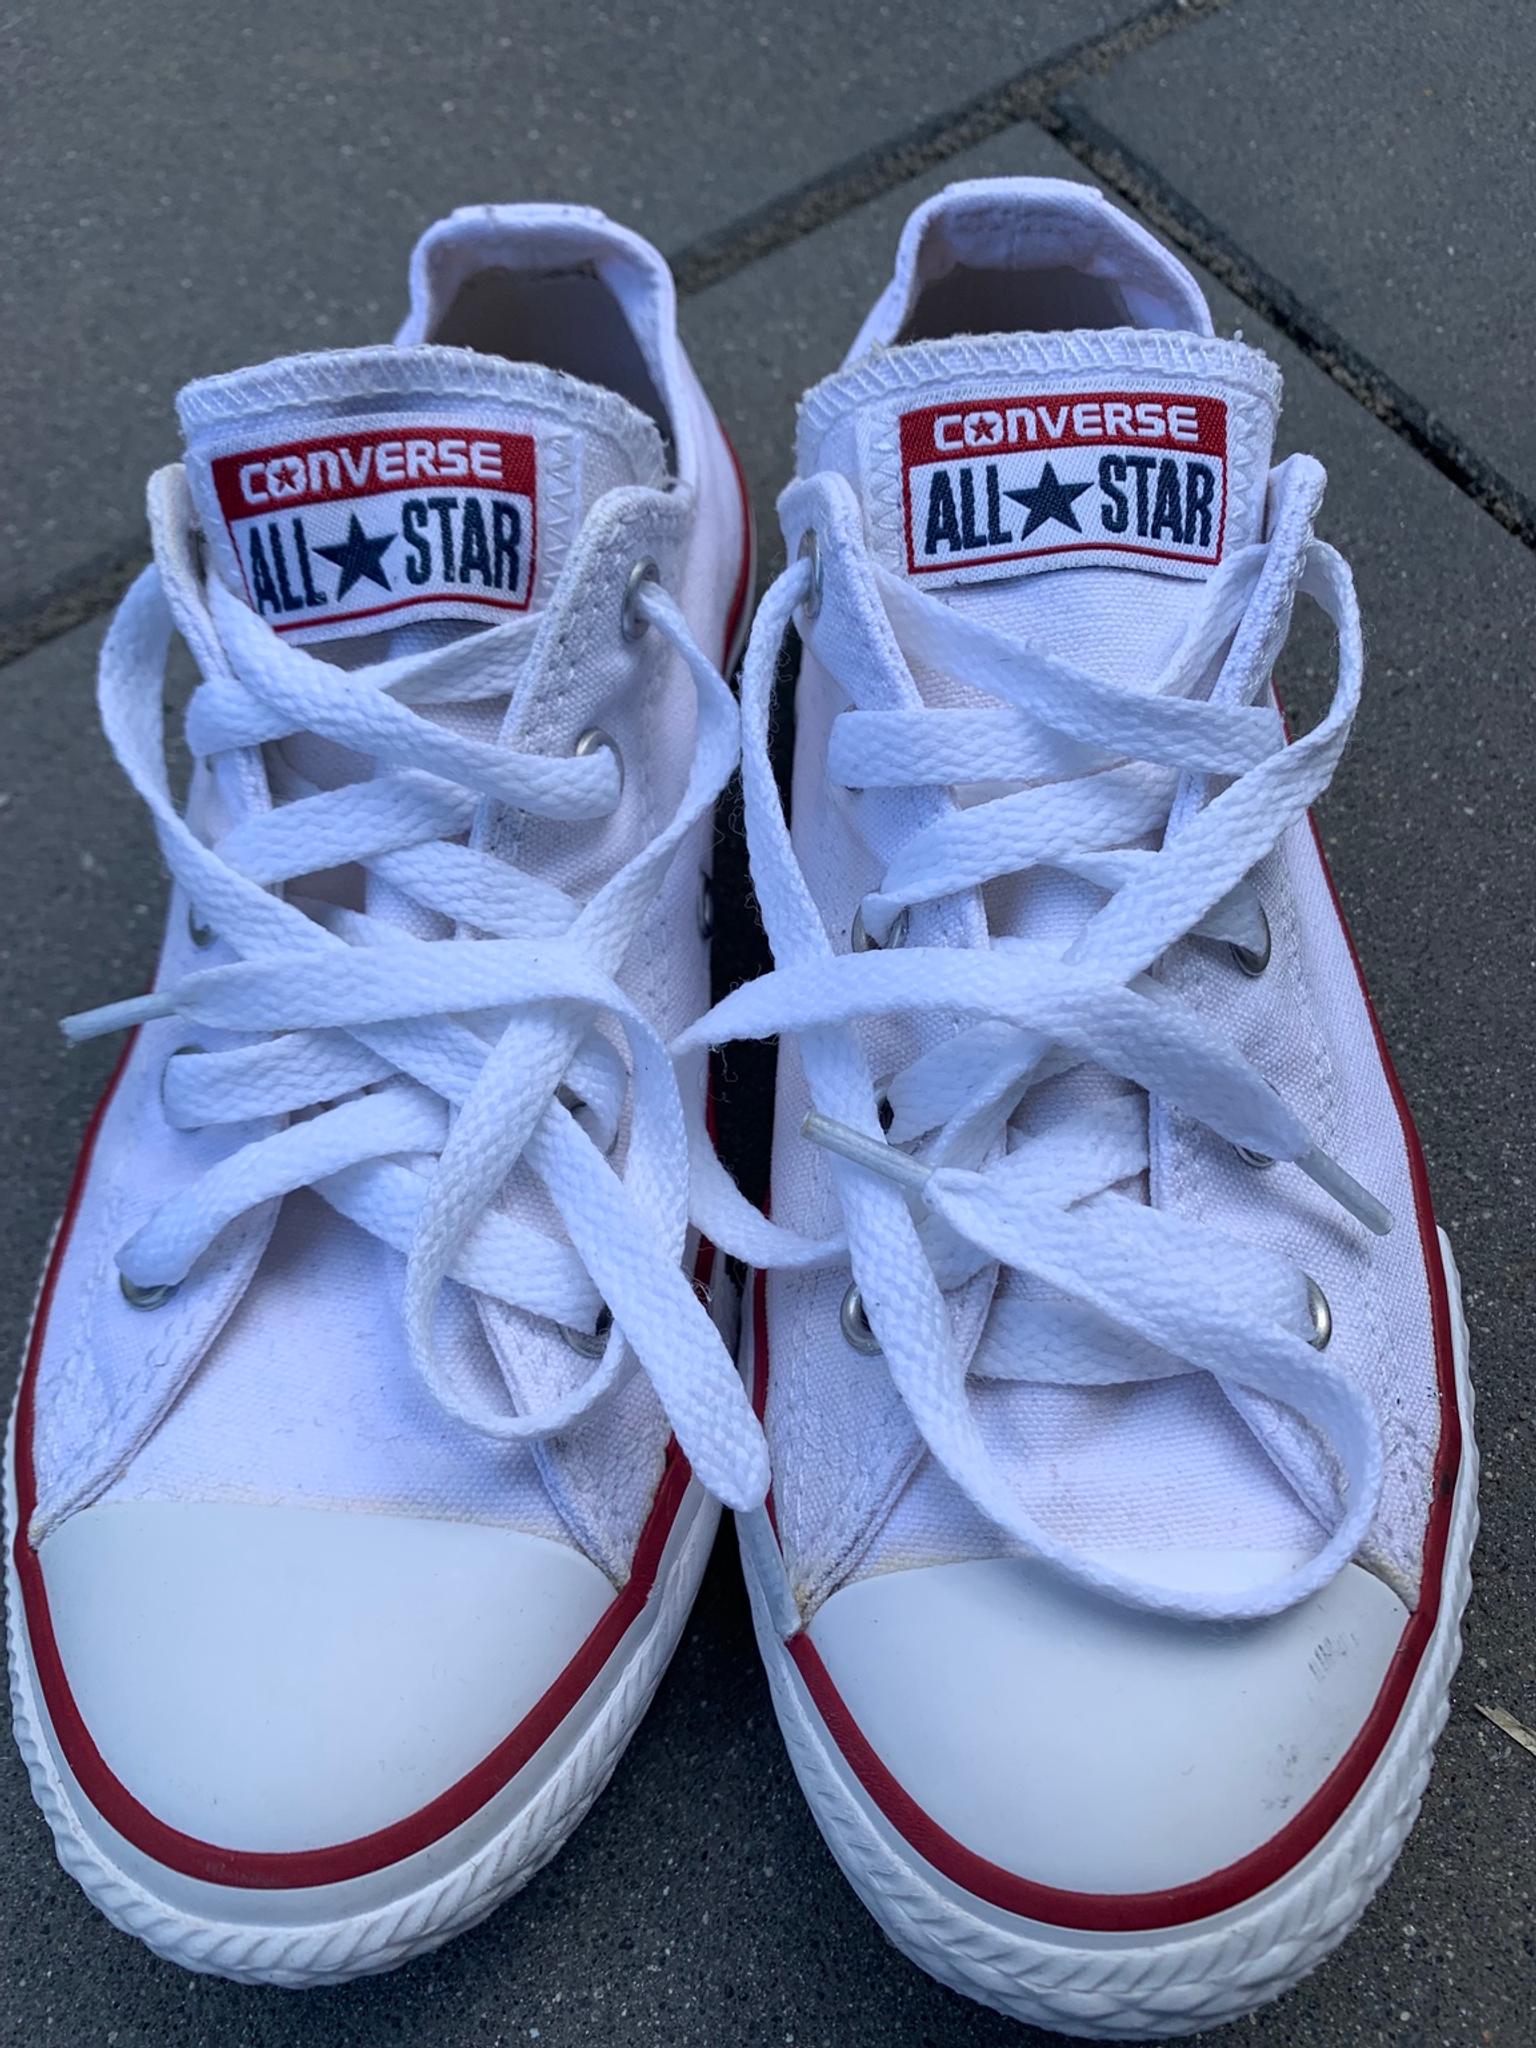 Converse chucks weiß in 82205 Gilching for €15.00 for sale | Shpock